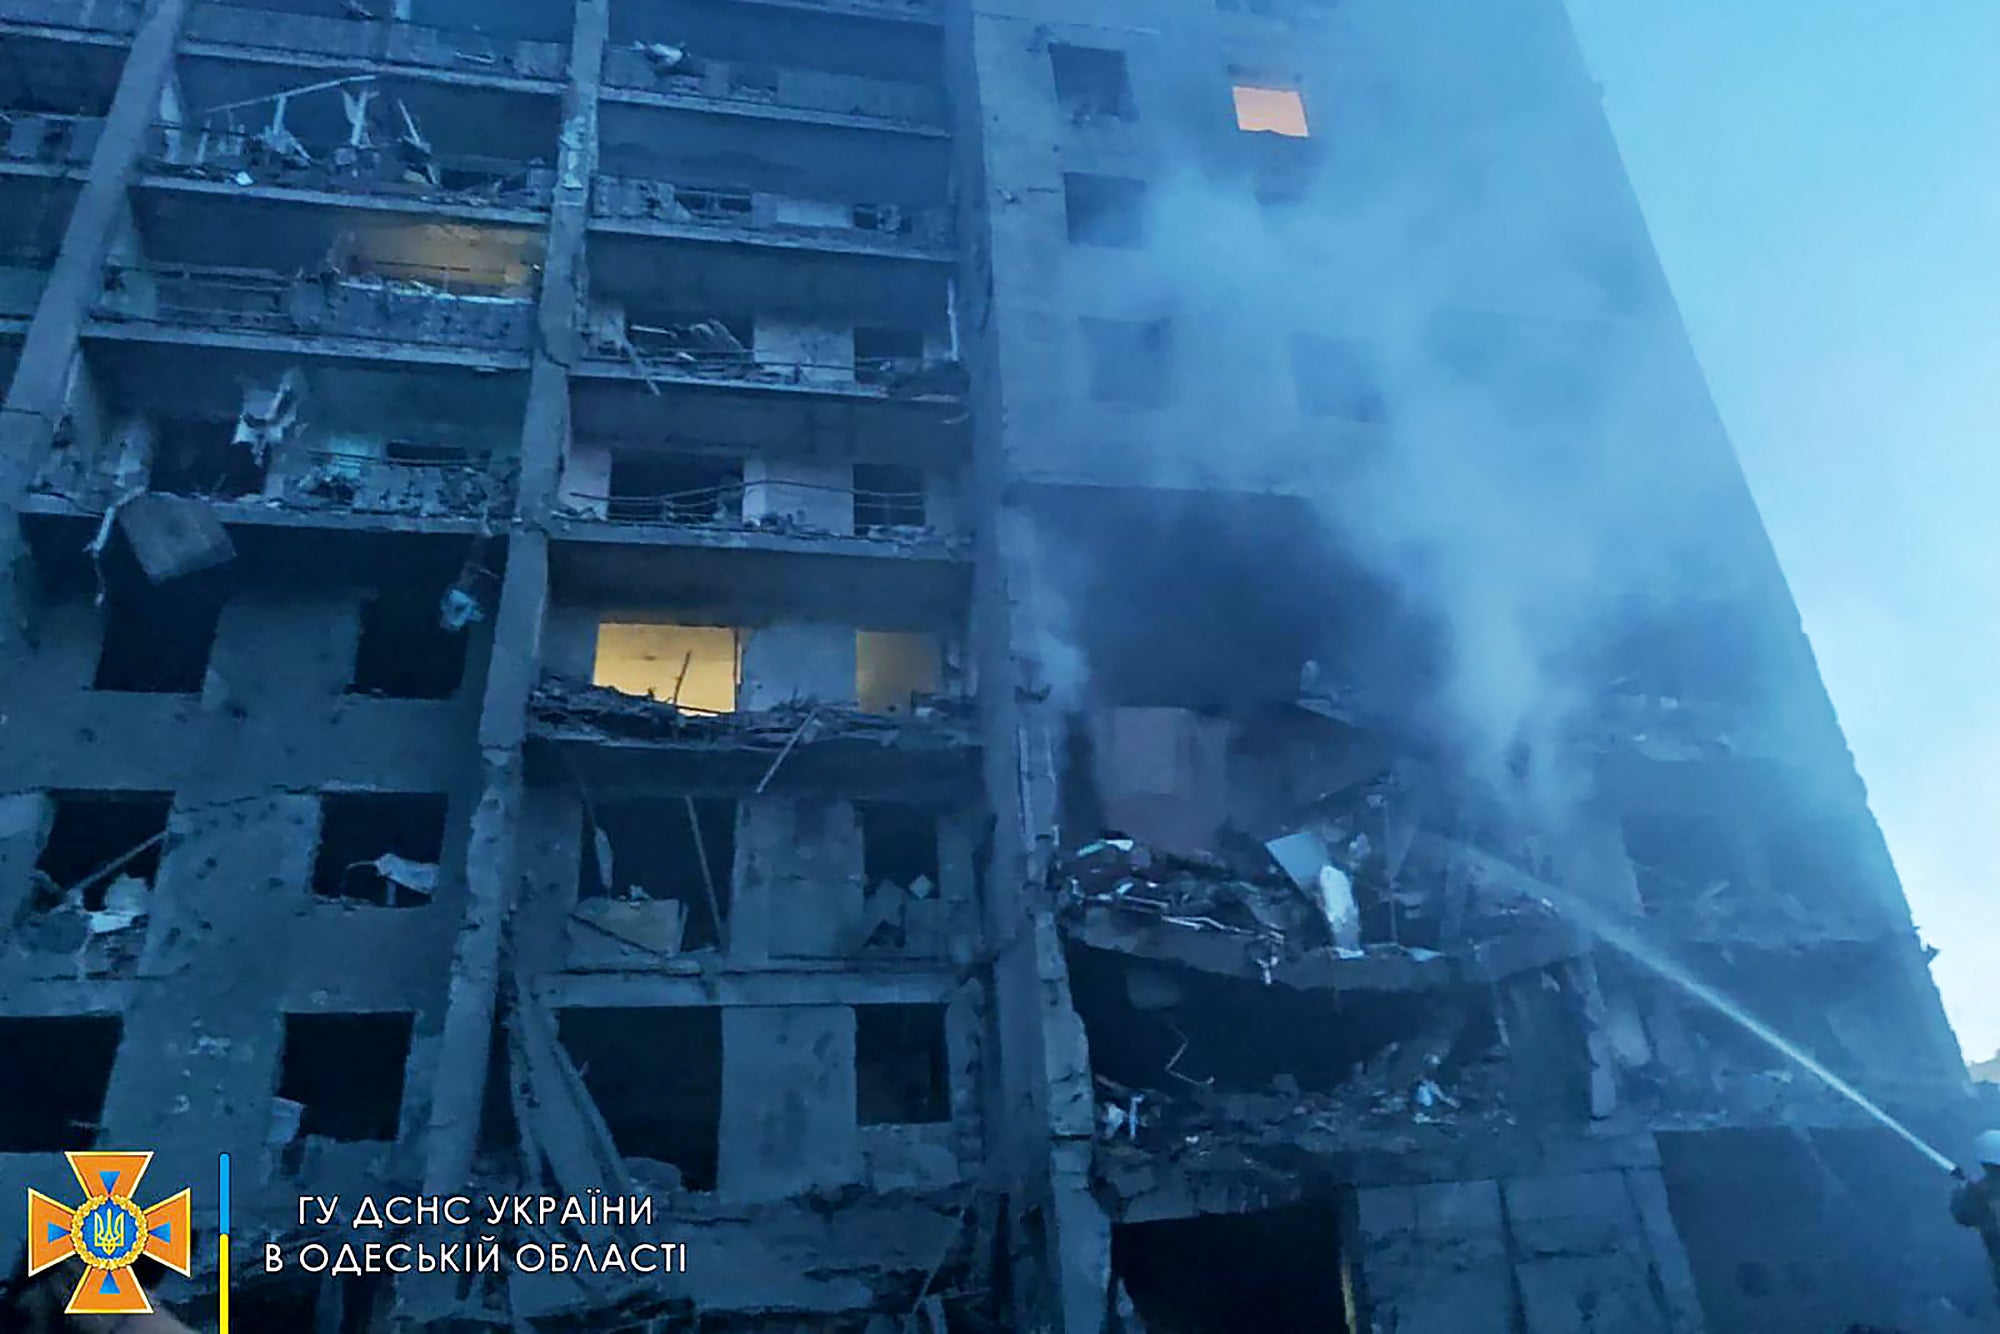 A firefighter putting out the fire in a residents building hit by a missile strike in the Ukrainian district of Bilhorod-Dnistrovskyi outside Odesa